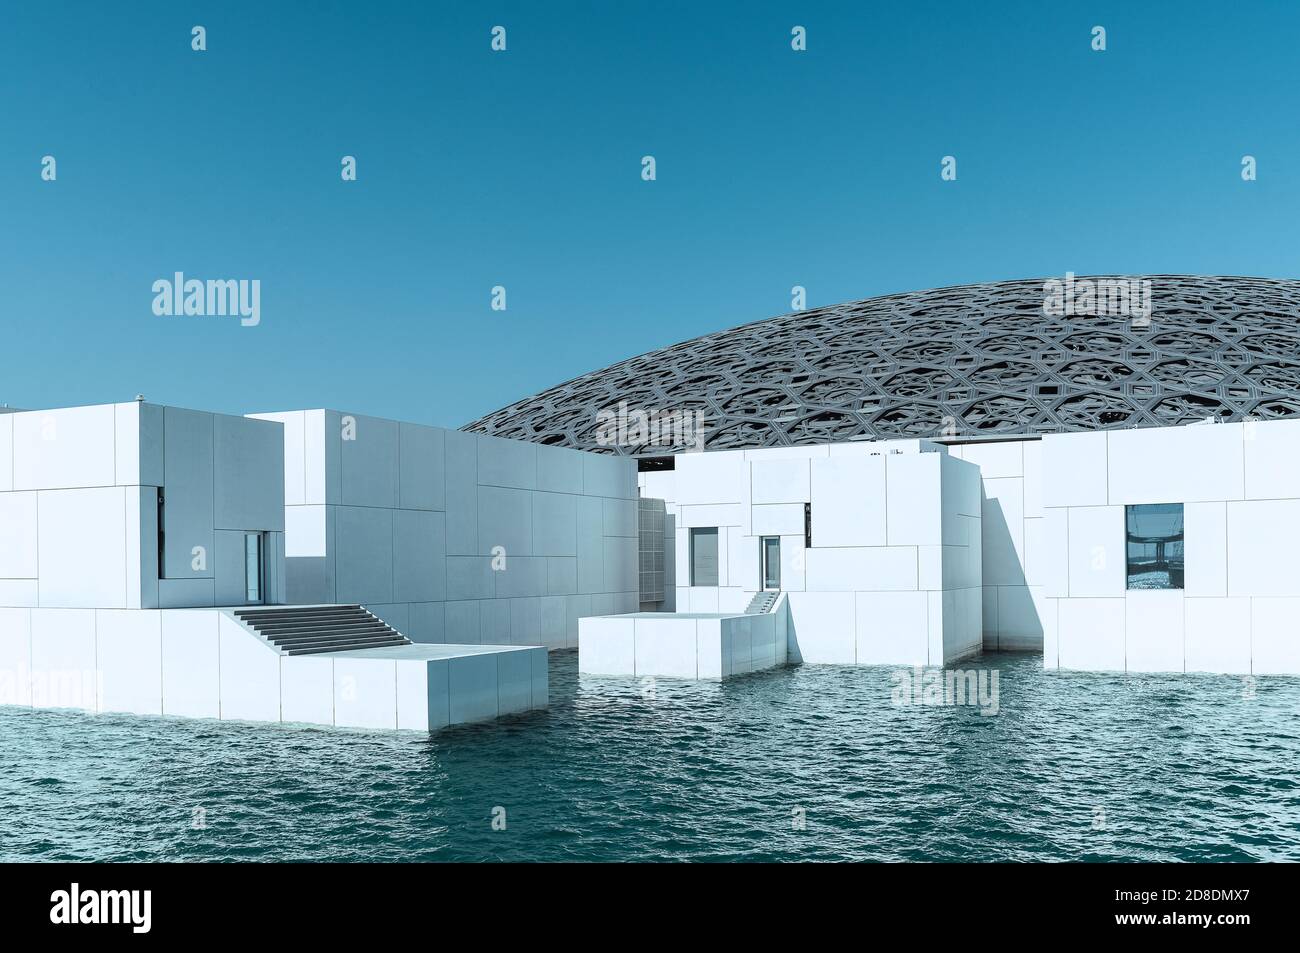 MONTERREY, MEXICO - Oct 19, 2020: Abu Dhabi, United Arab Emirates, October 18, 2020: Louvre Abu Dhabi. View of the Louvre, showing the 'Rain of Light' Stock Photo